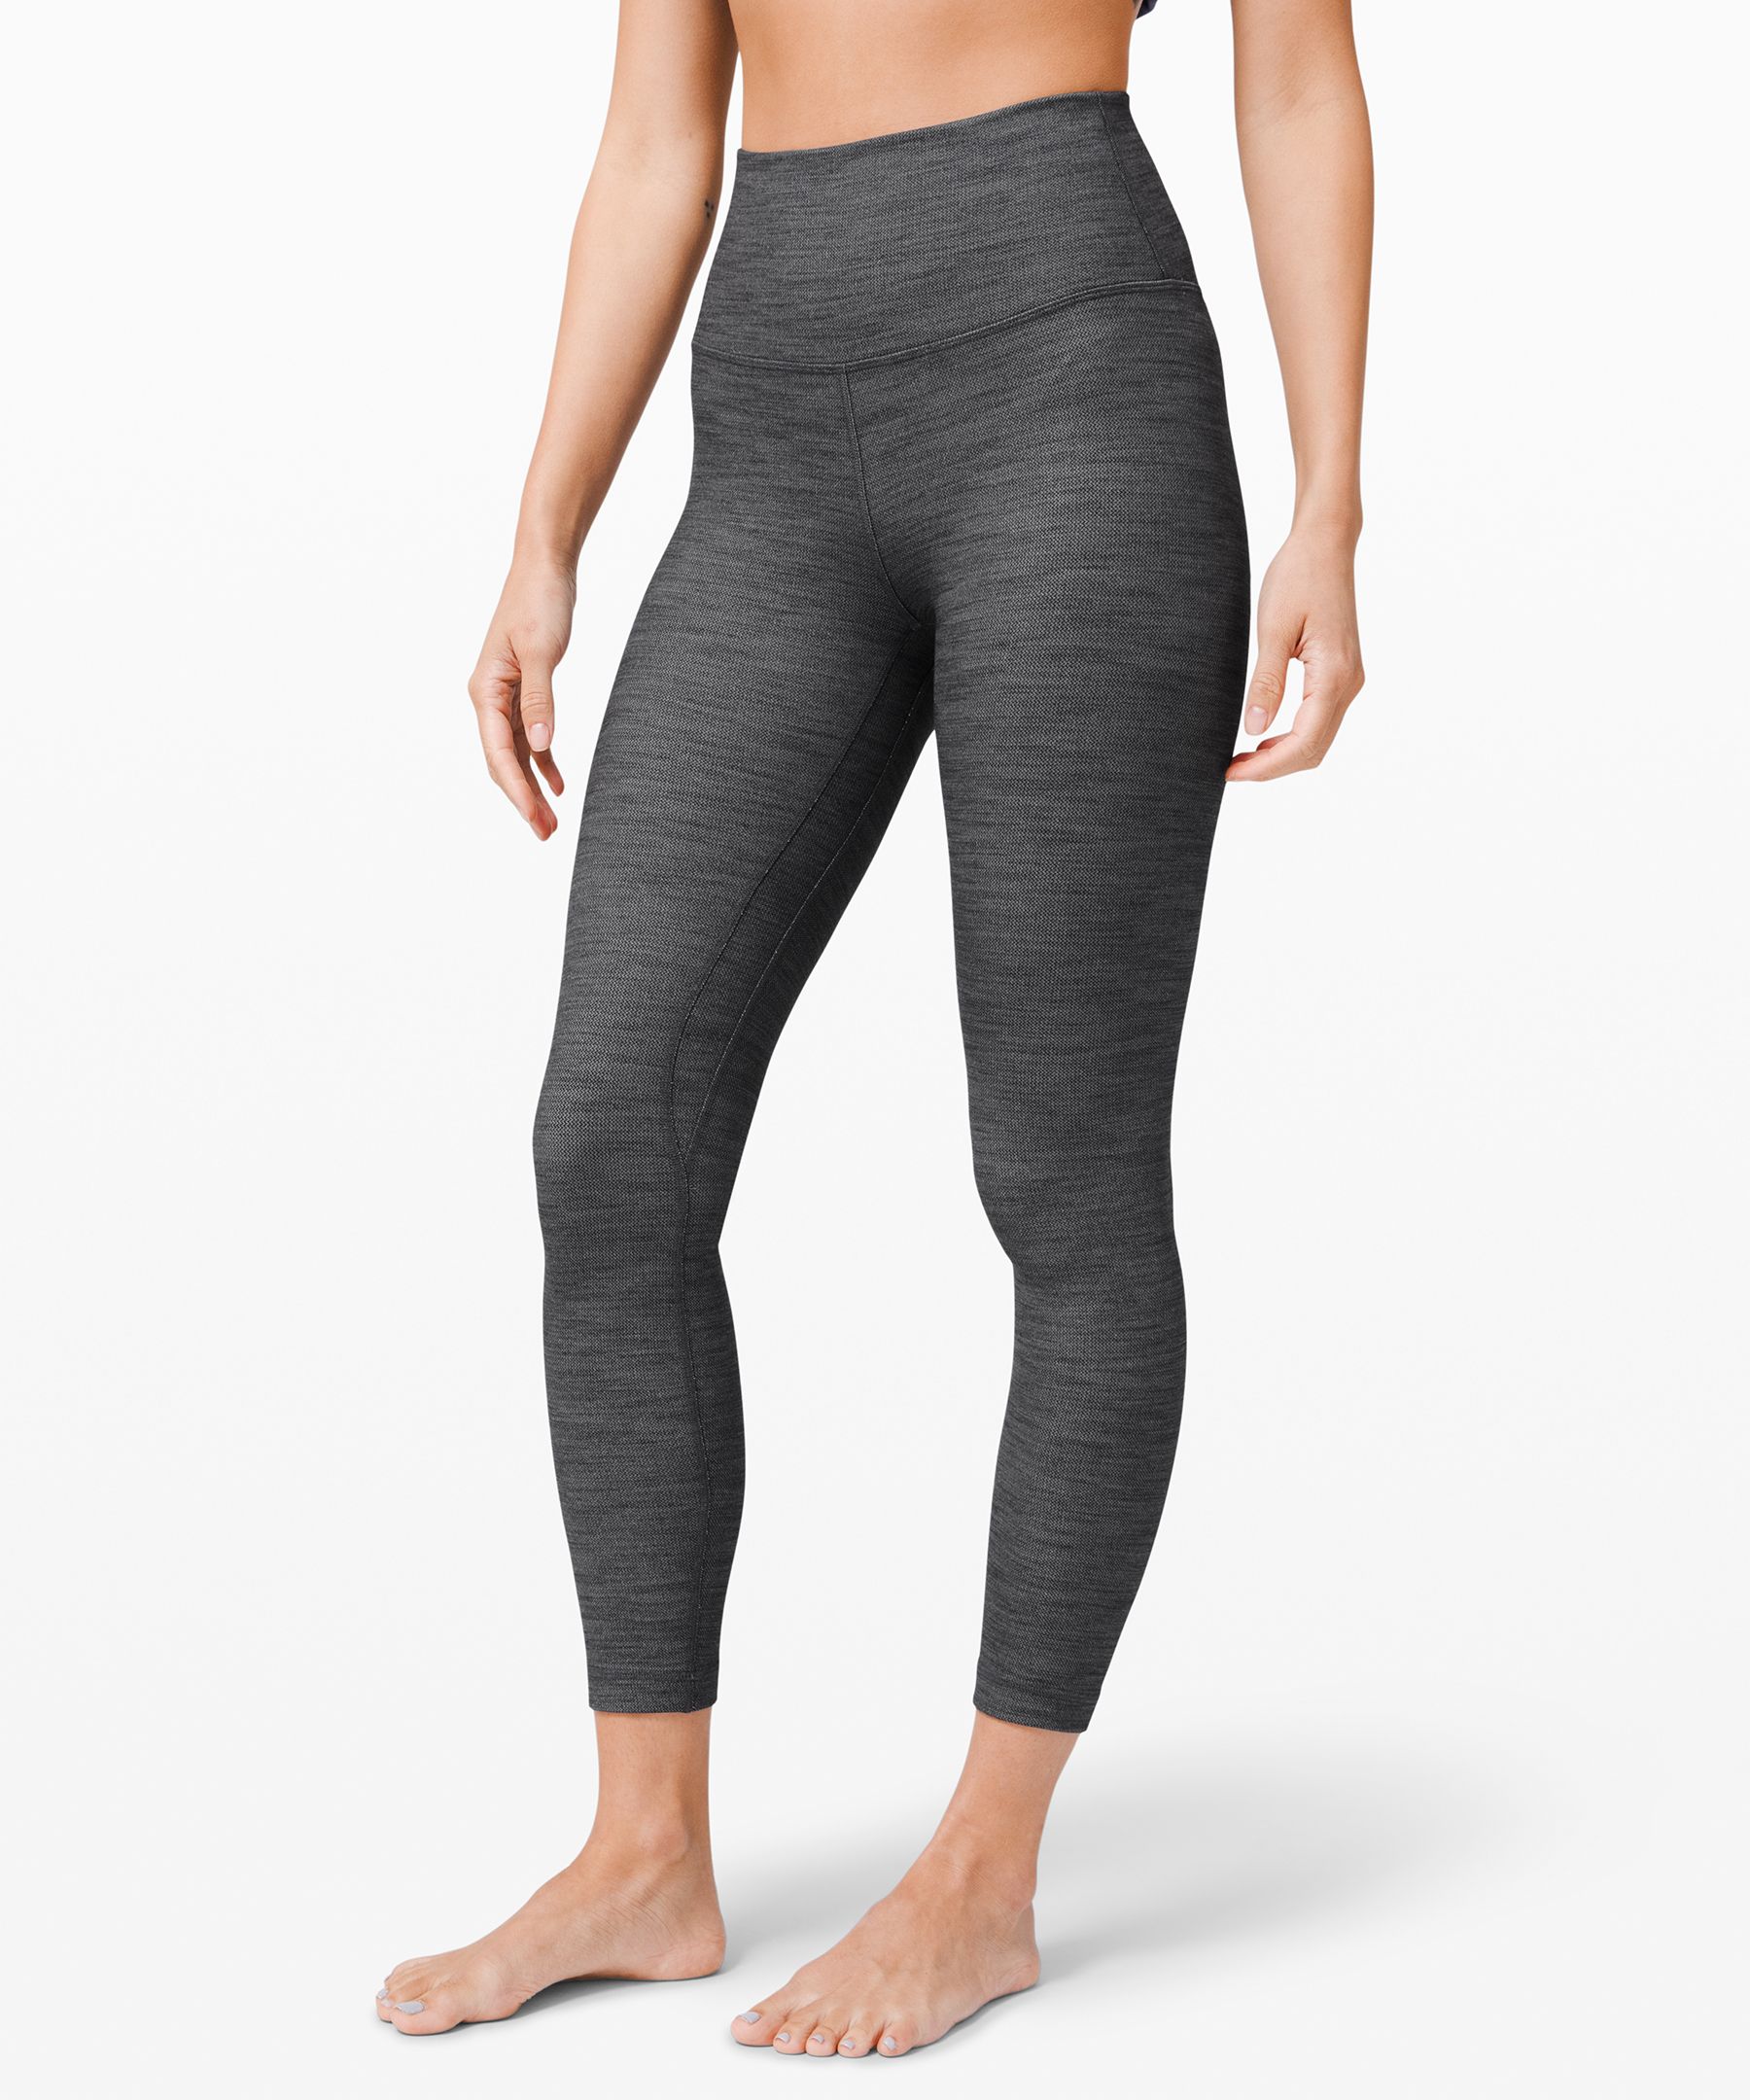 Lululemon Align High-Rise Pant 24 - Grey, Shop Today. Get it Tomorrow!